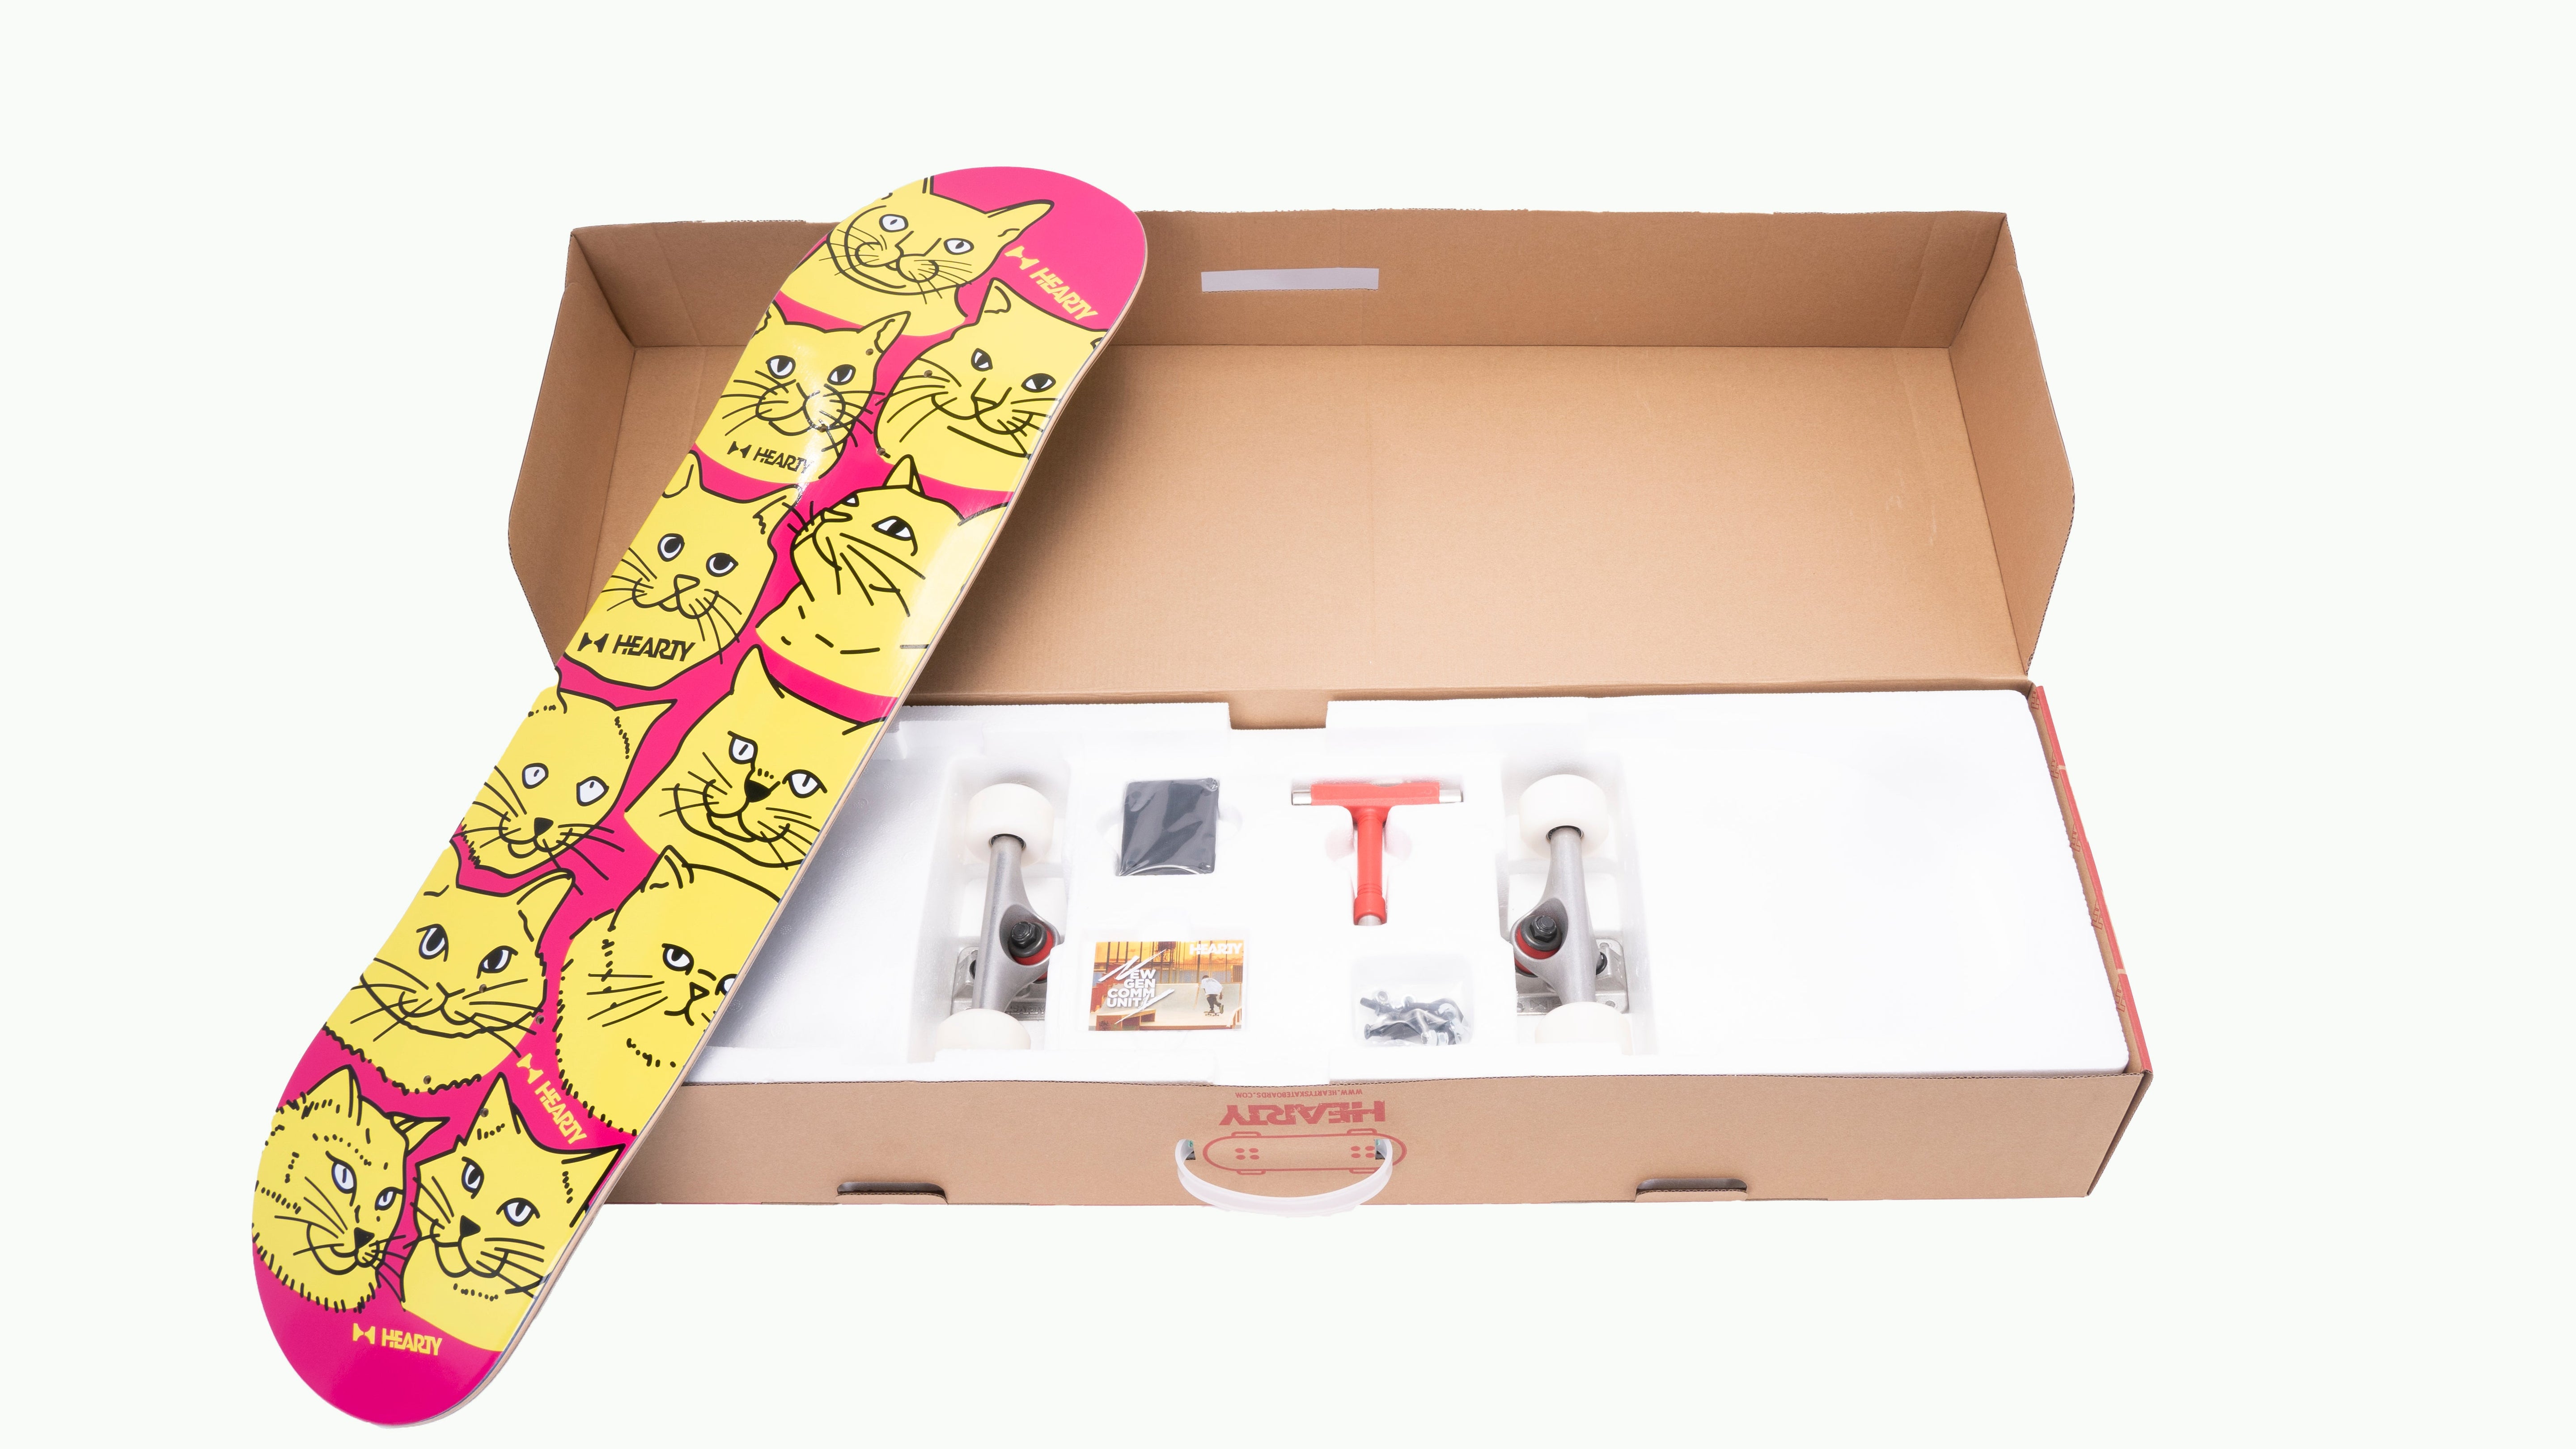 Hearty Pro-Complete Skateboard Pack- Unassembled- 8.0" & 8.25"-Cat